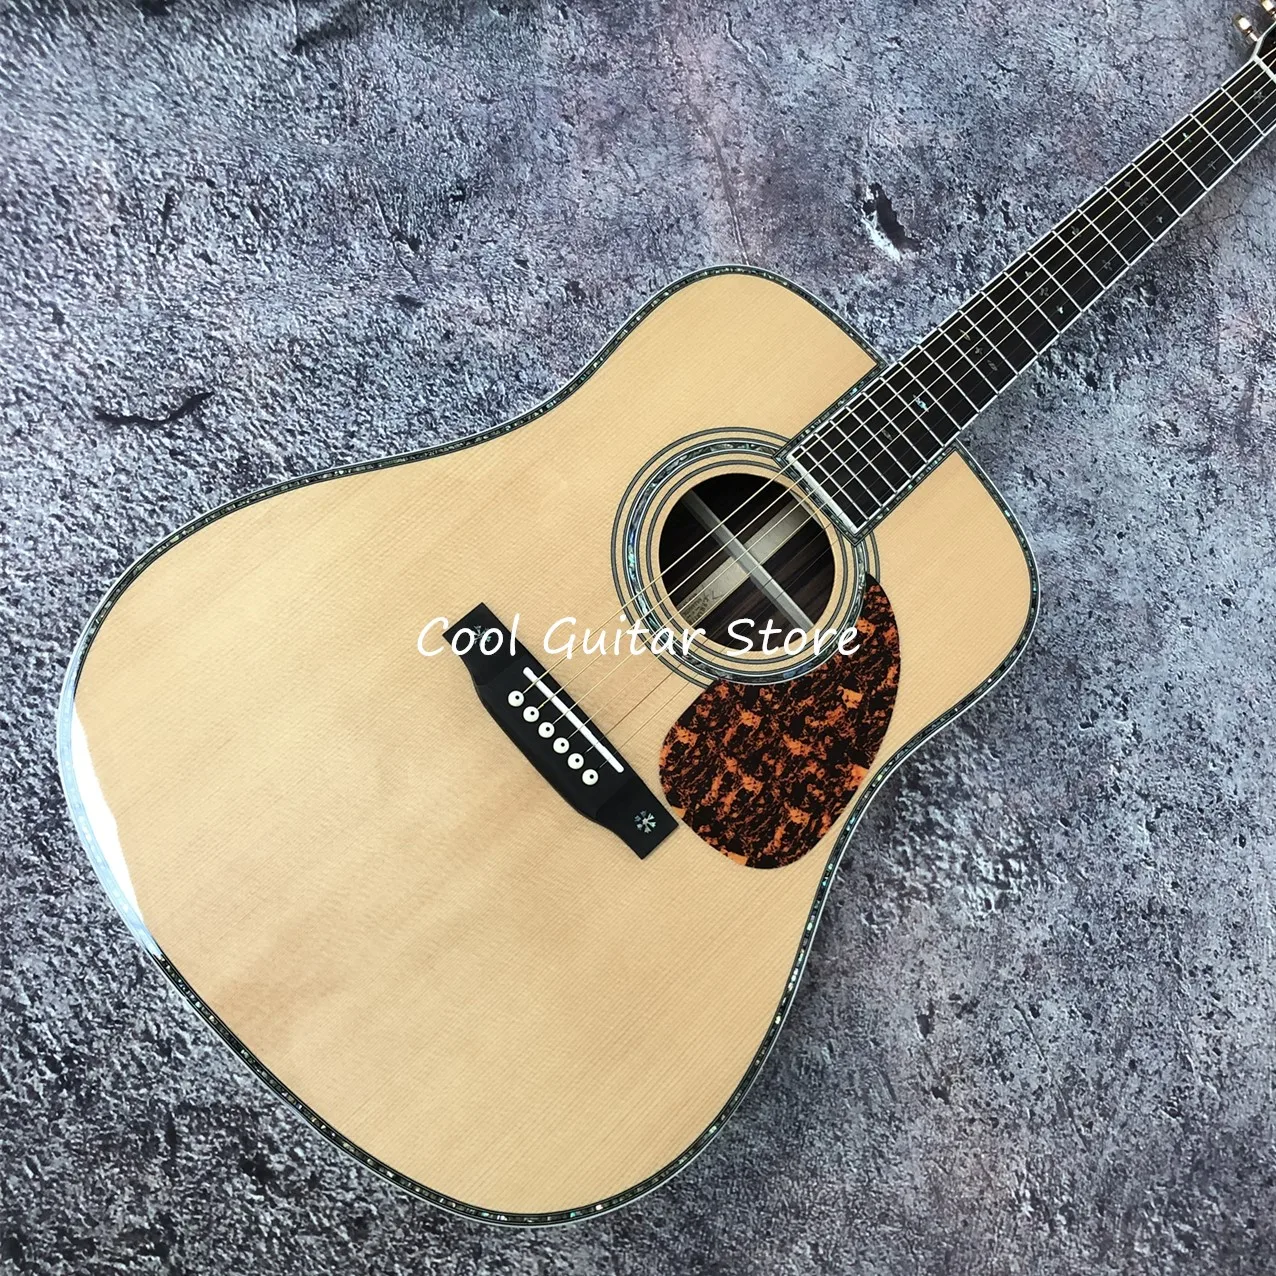 

Nature Wood Color Solid Spruce Top Custom Acoustic Guitar,Ebony Bridge,Abalone Inlay,42 Style,6 Strings,Free Shipping